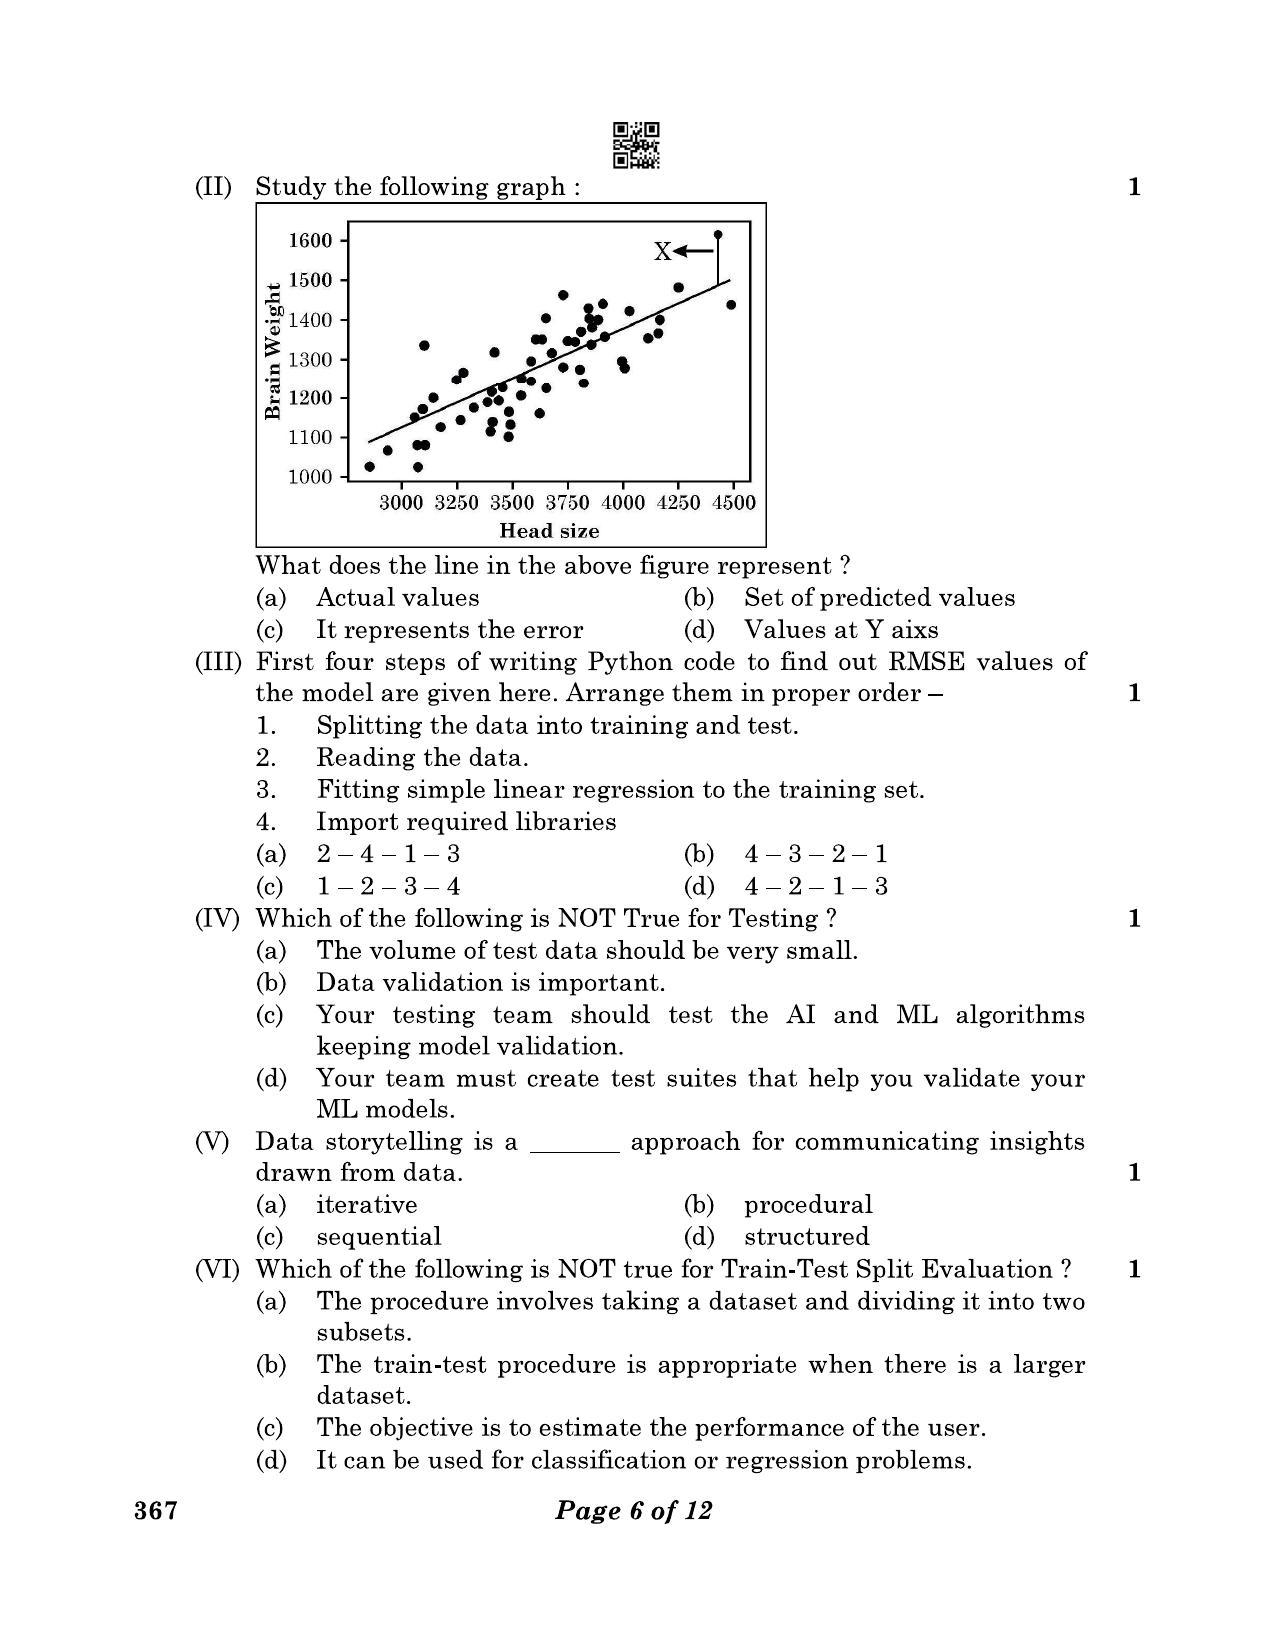 CBSE Class 12 367_Artificial Intelligence 2023 Question Paper - Page 6